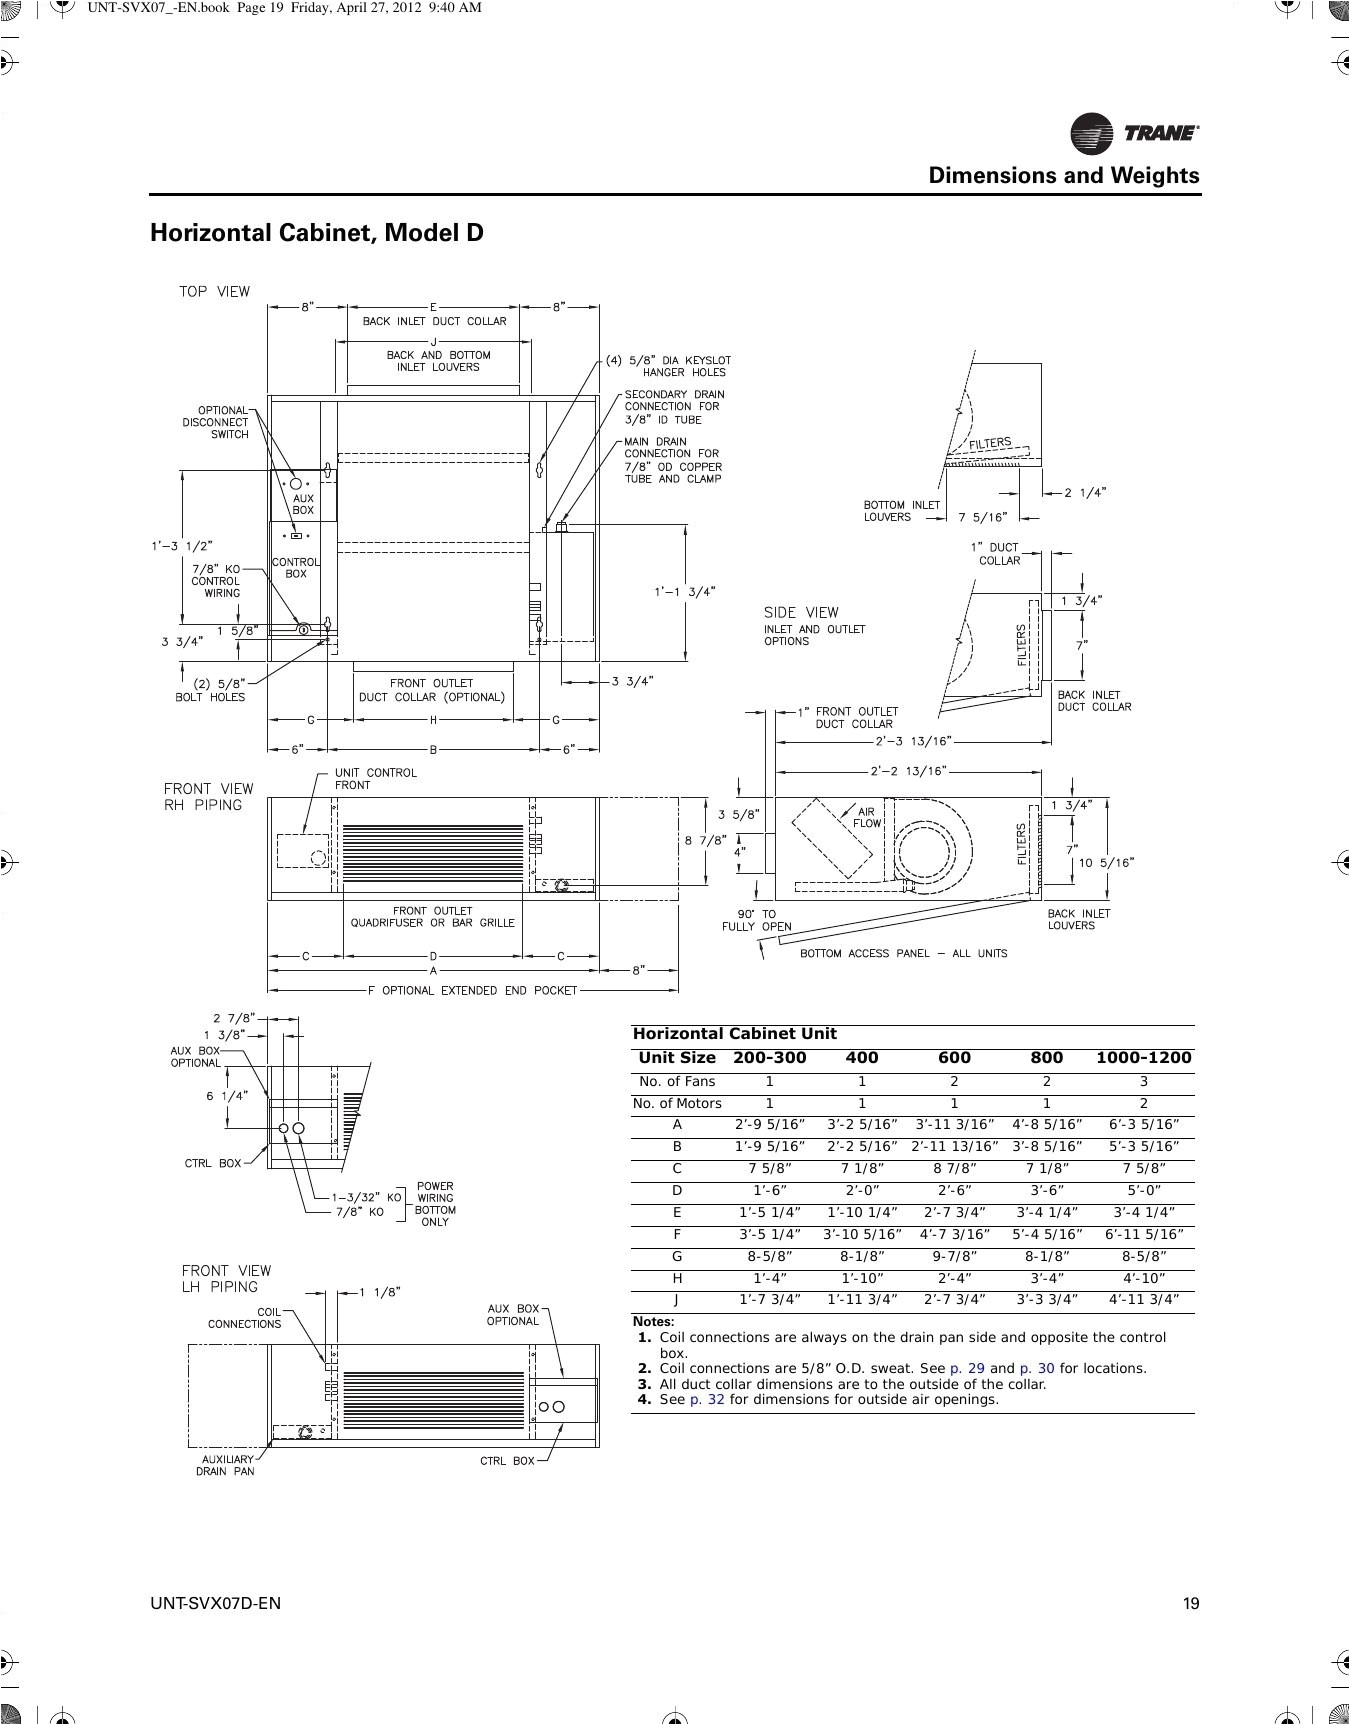 wiring diagram for mobile home furnace fresh coleman manufactured mobile home coleman furnace thermostat wiring diagram